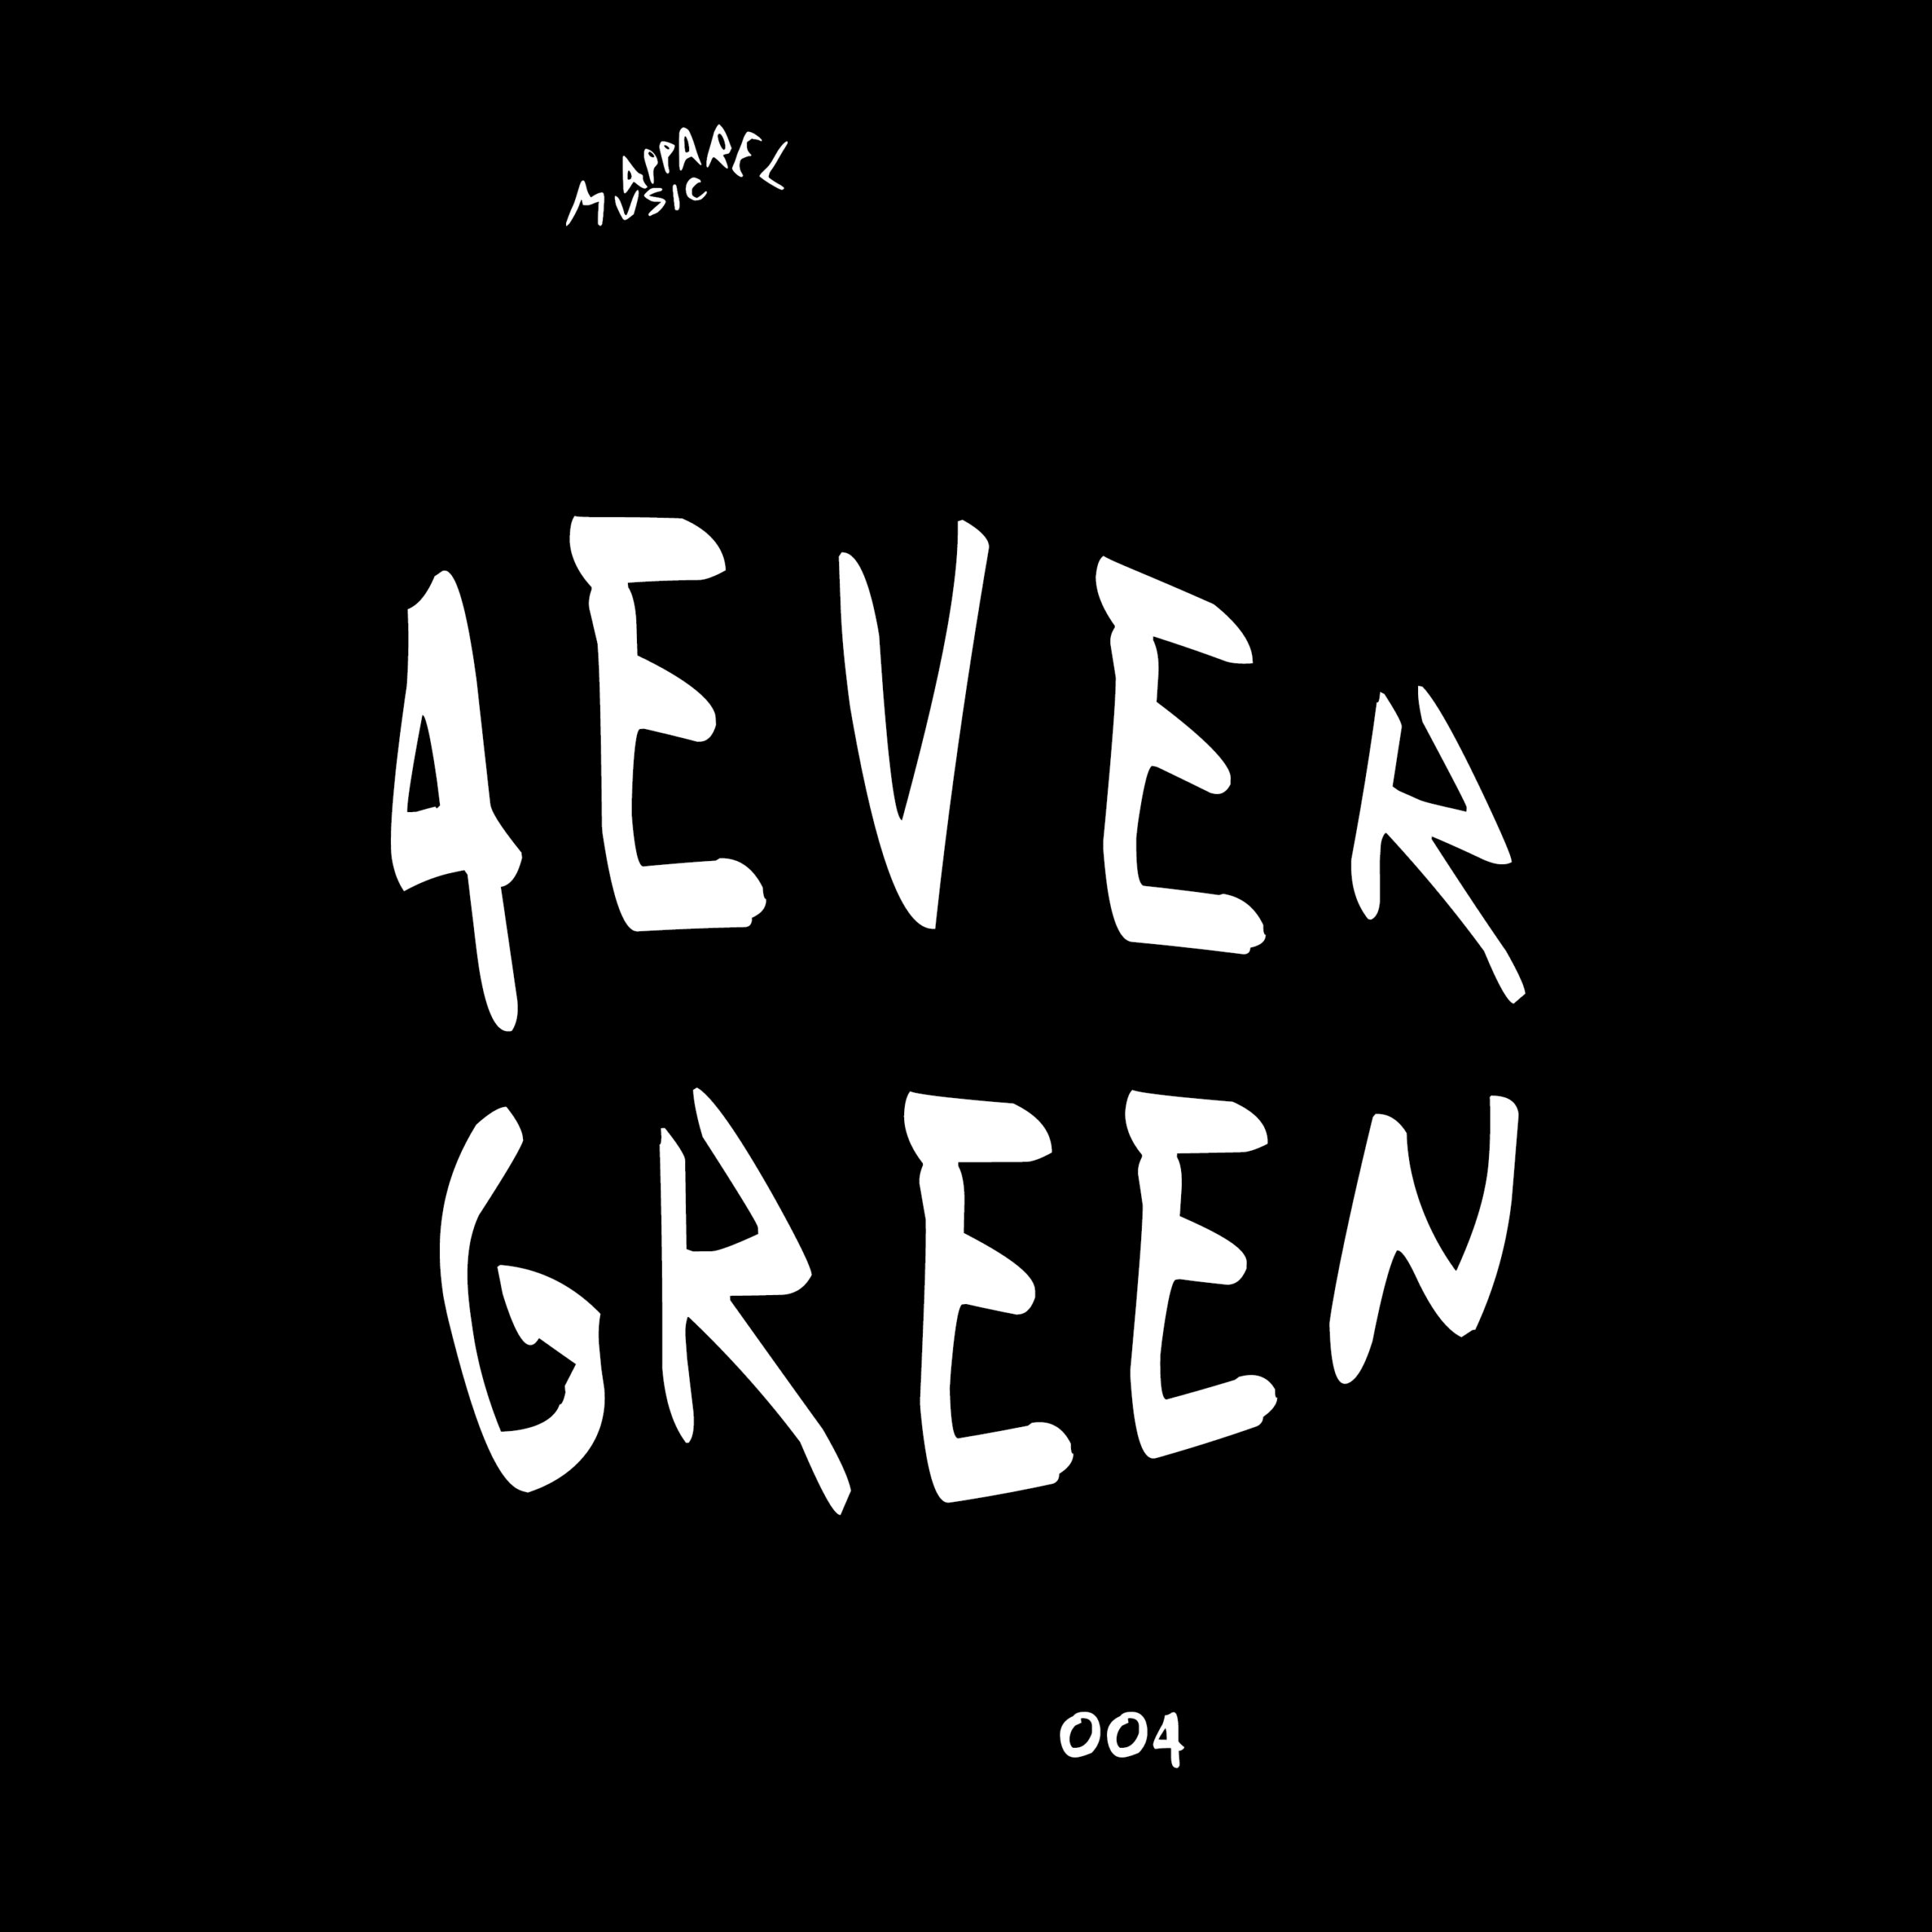 Out now ‘4evergreen 004’ by Various Artists